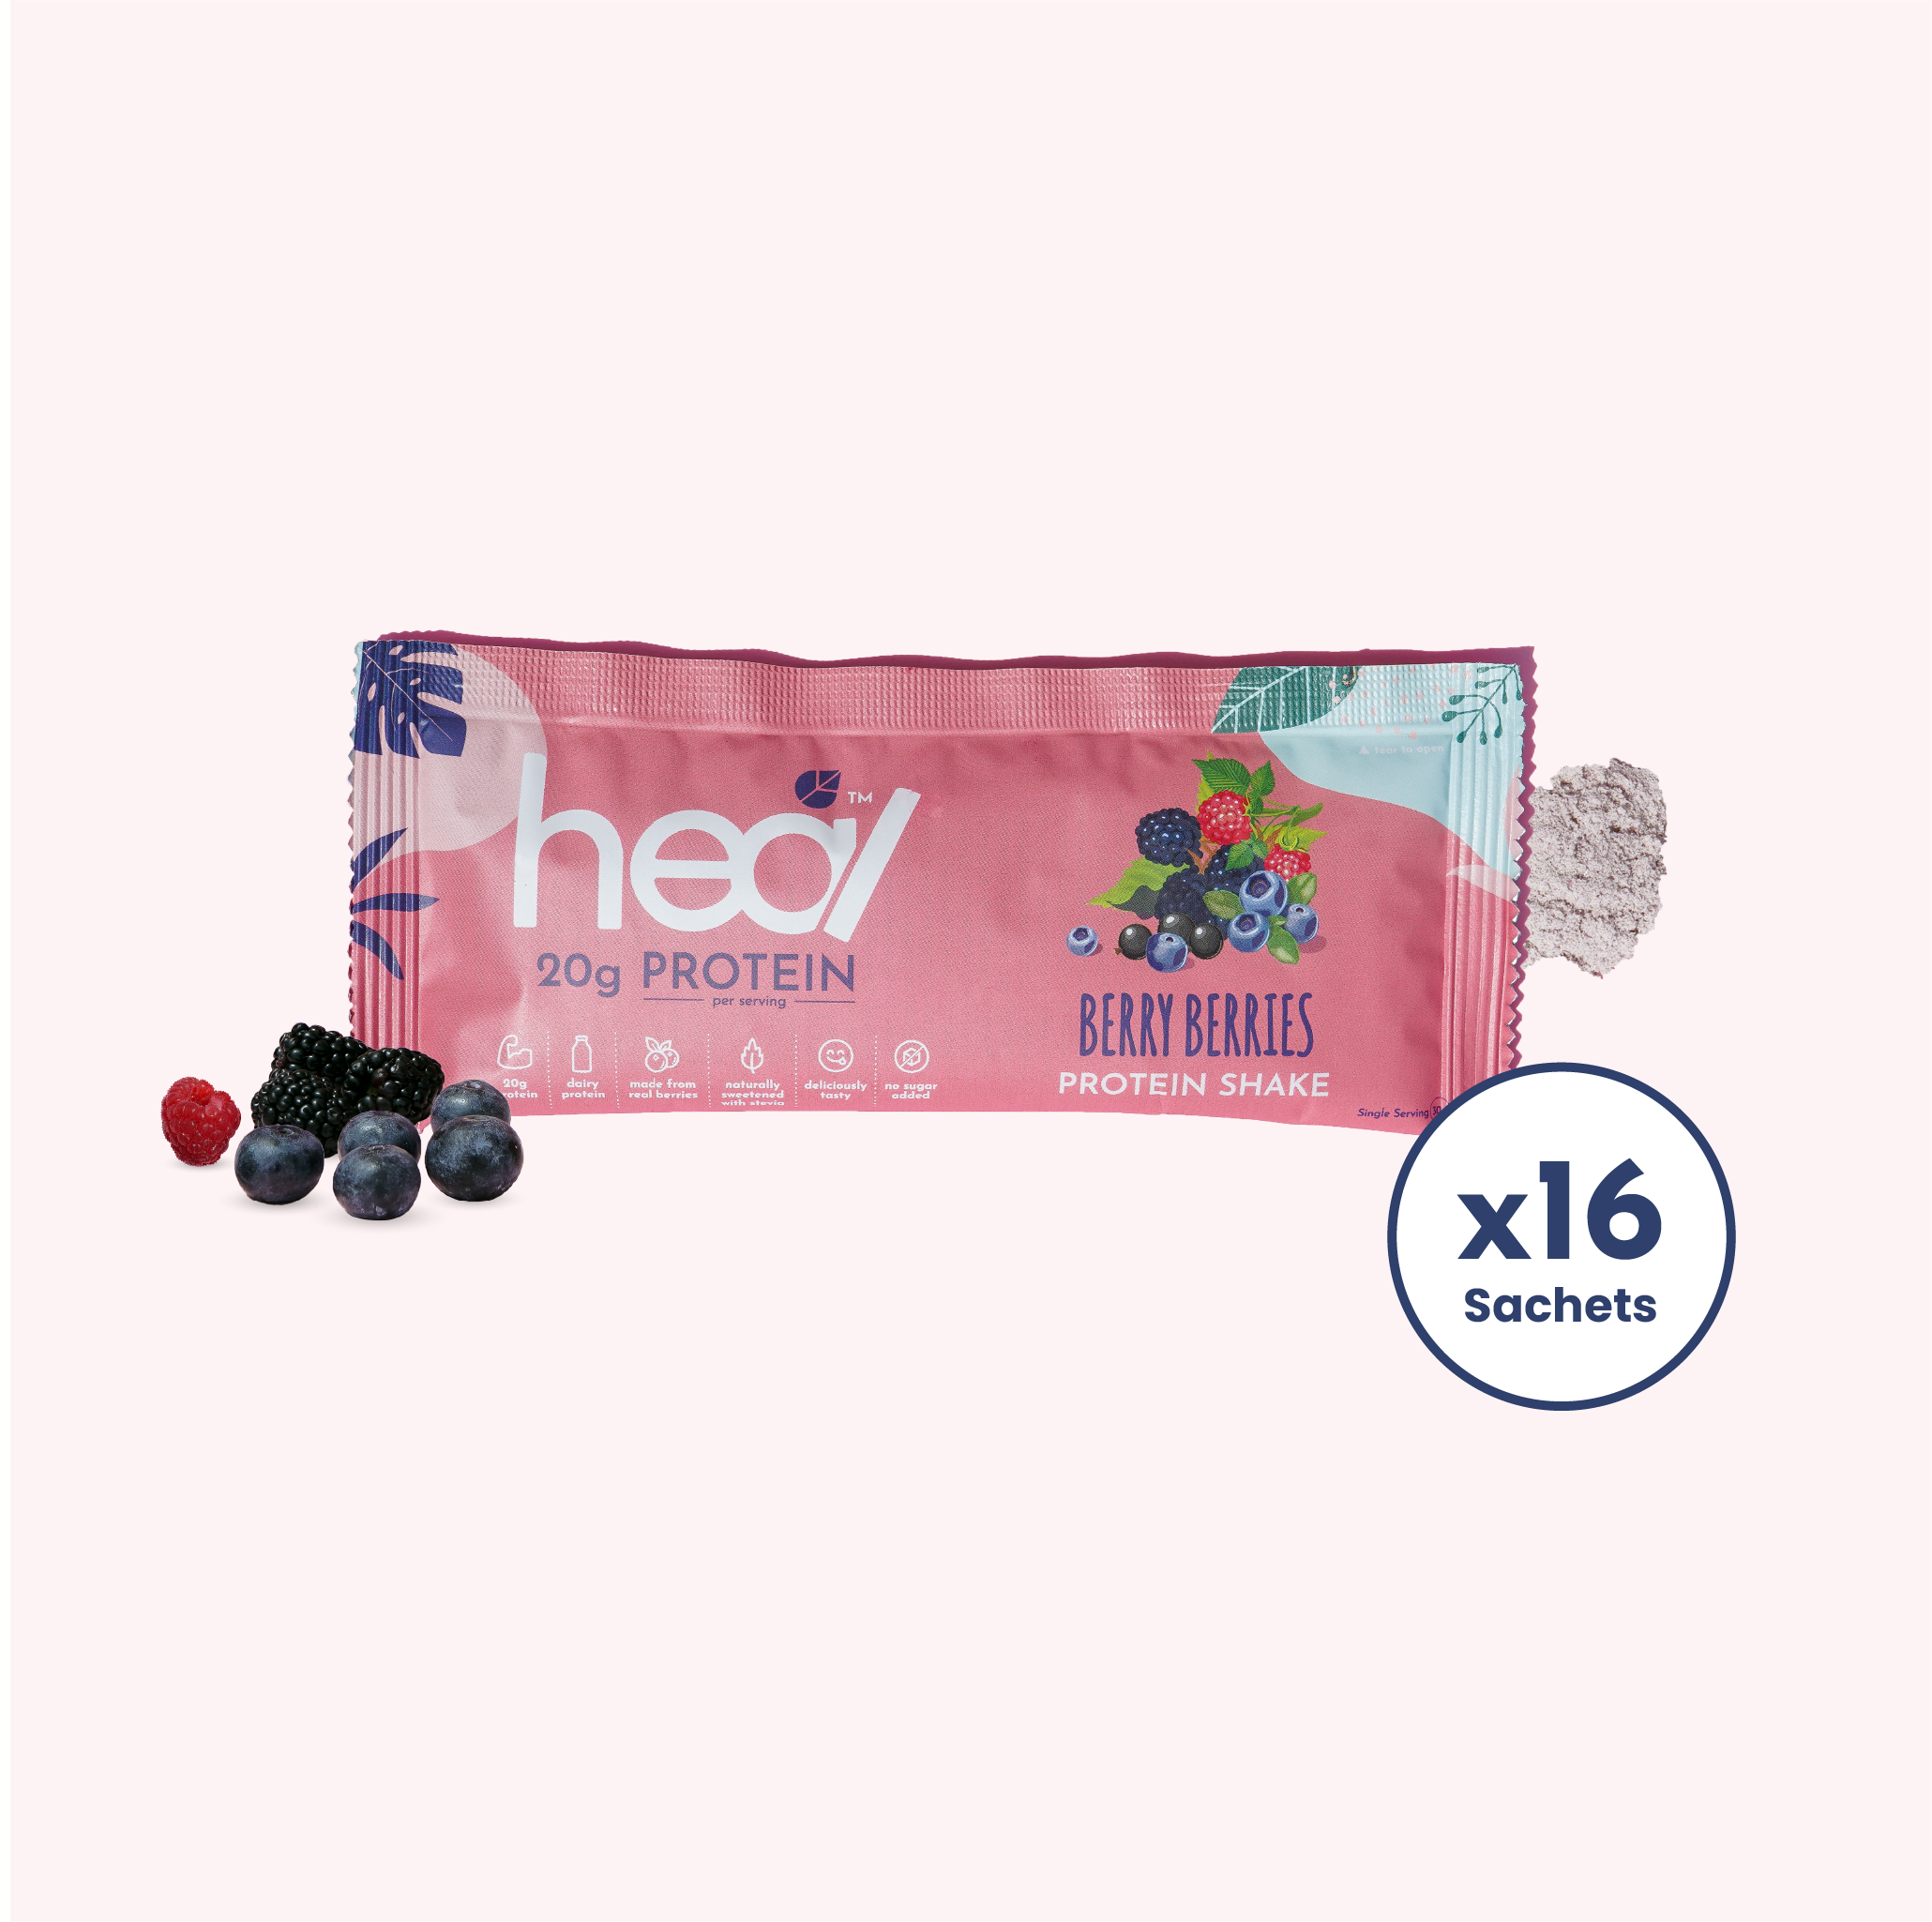 [Subscription Plan] Berry Berries Protein Shake, 16 Sachets (30g)